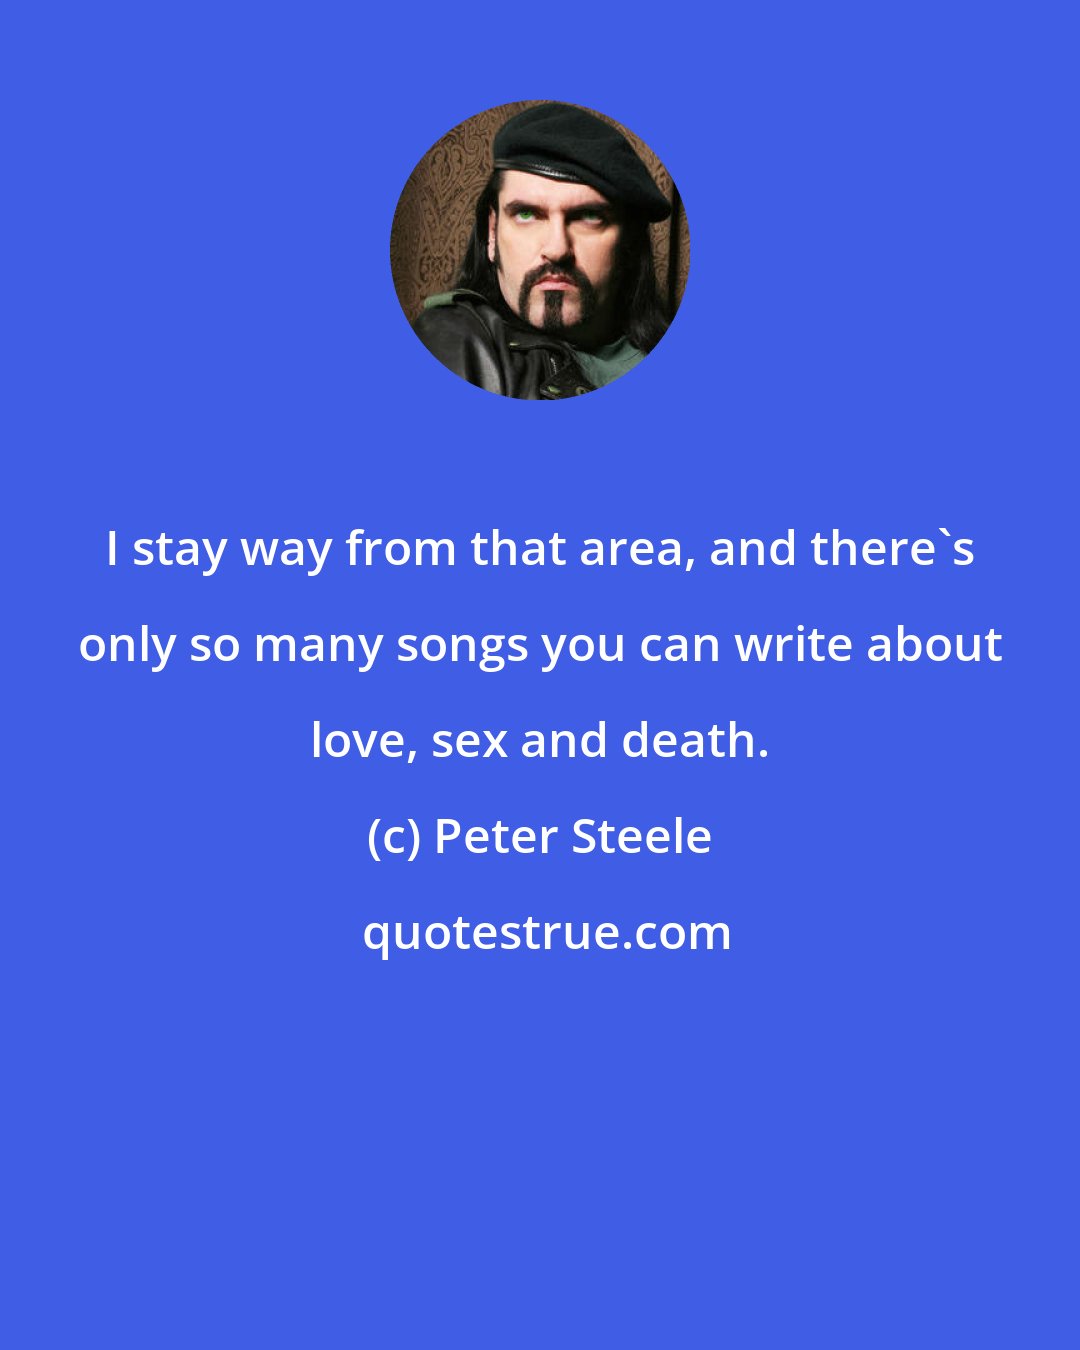 Peter Steele: I stay way from that area, and there's only so many songs you can write about love, sex and death.